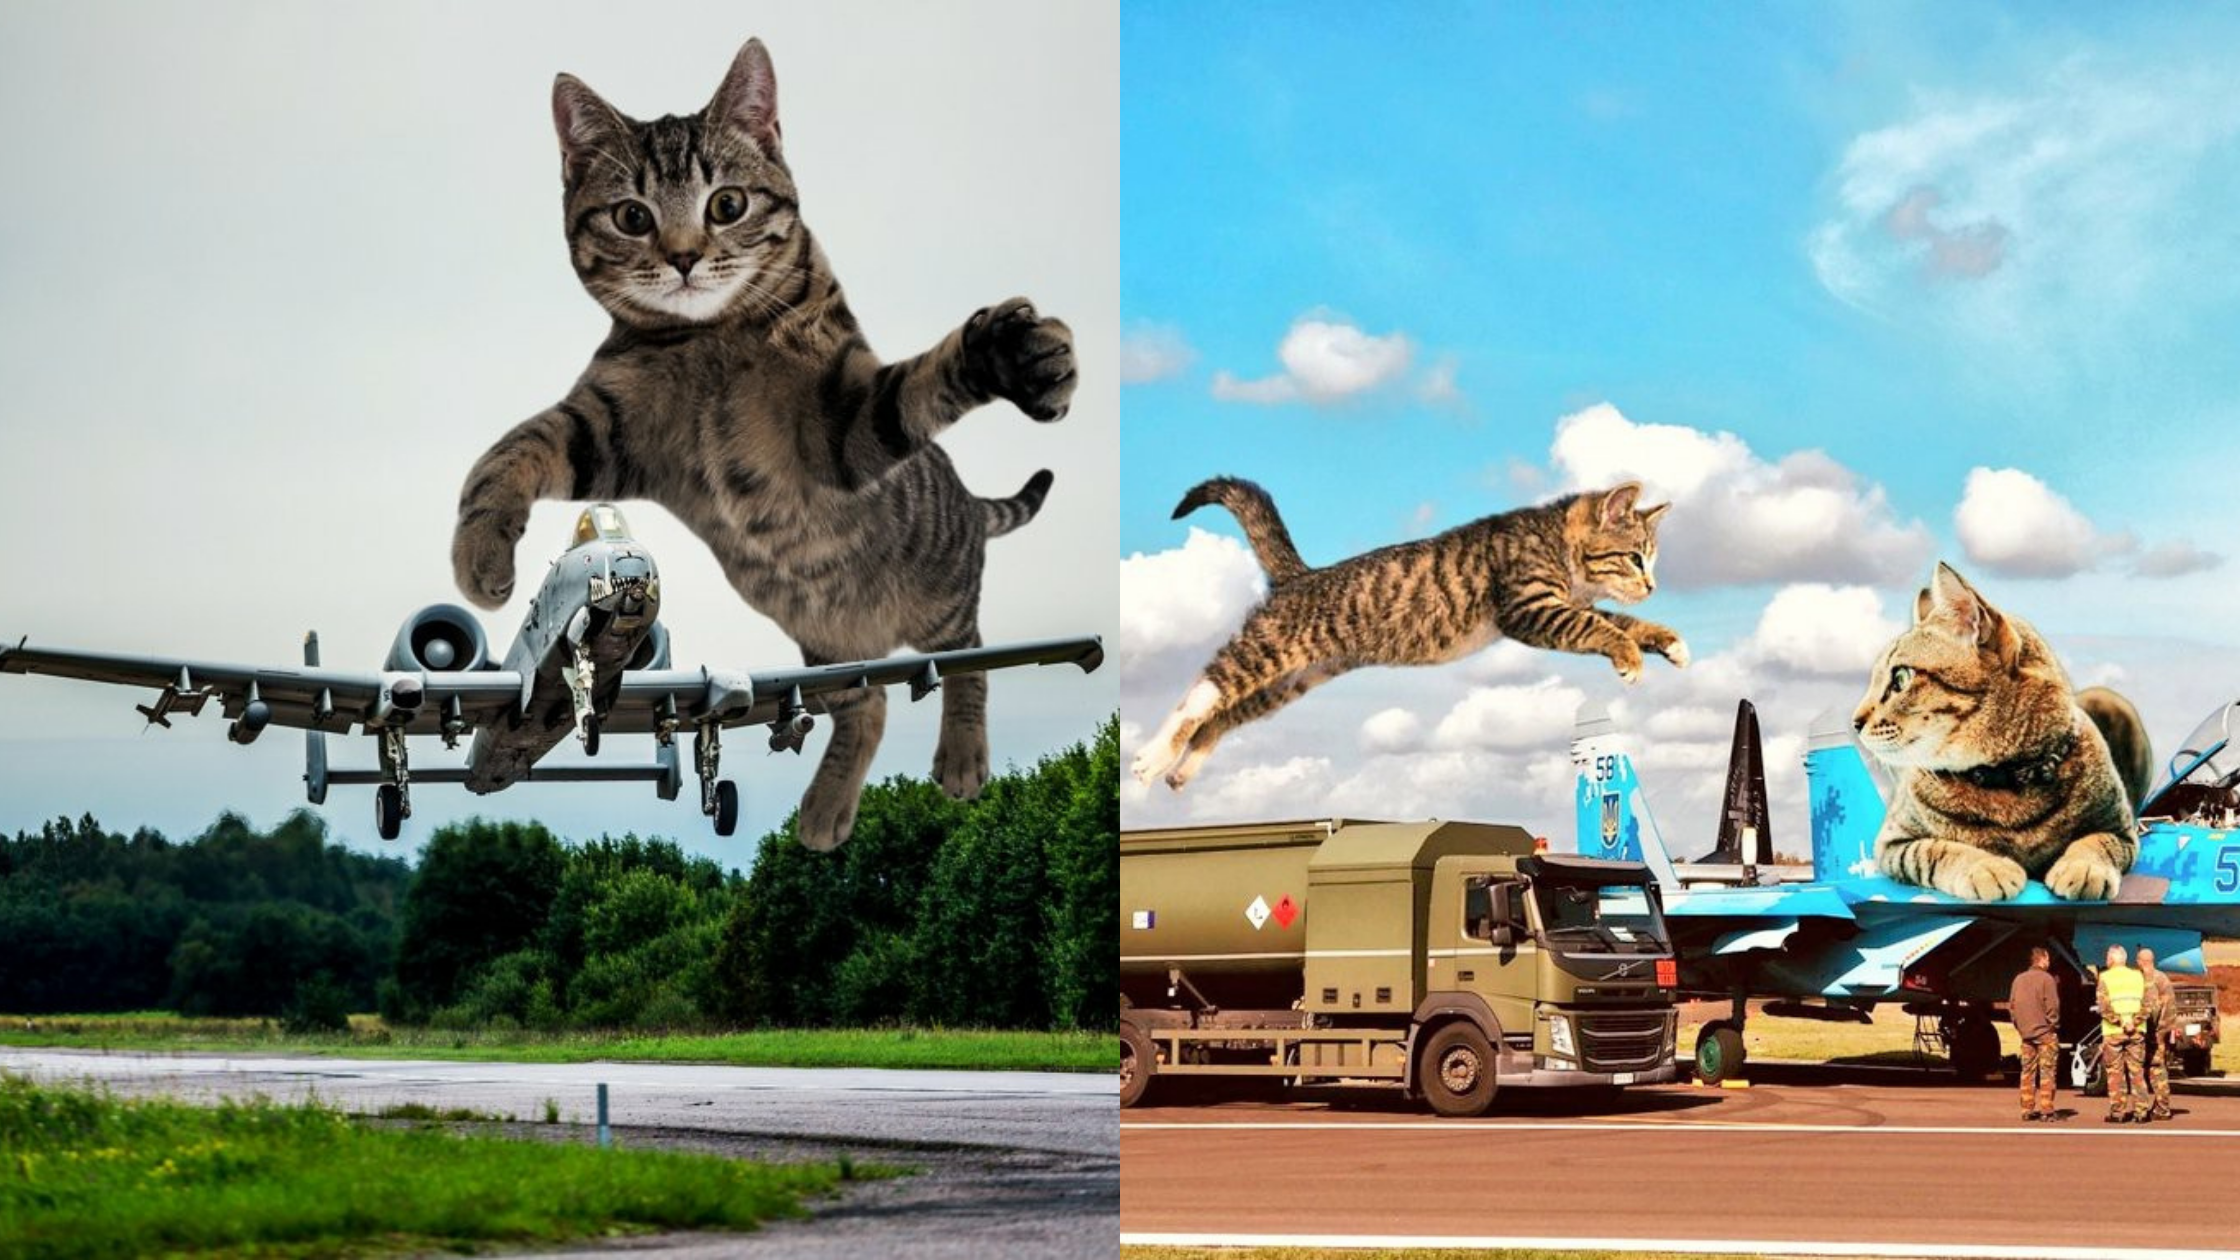 These Giant Military Cats Are Hilarious